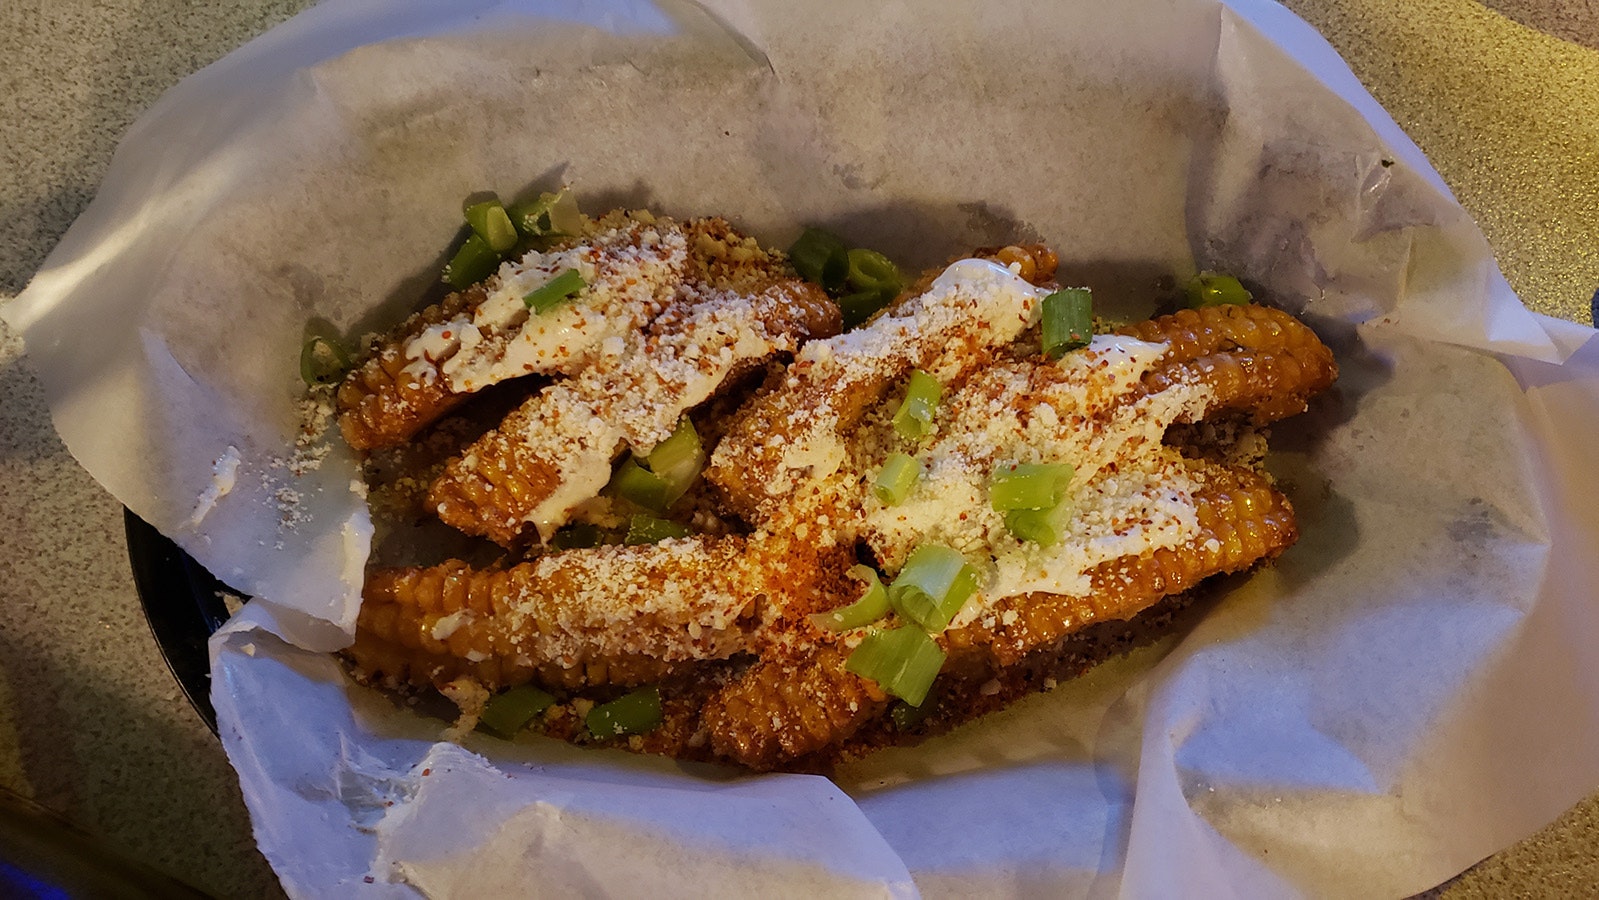 The fried corn riblets are a fun and unique appetizer at Michael's Big City Steakhouse.